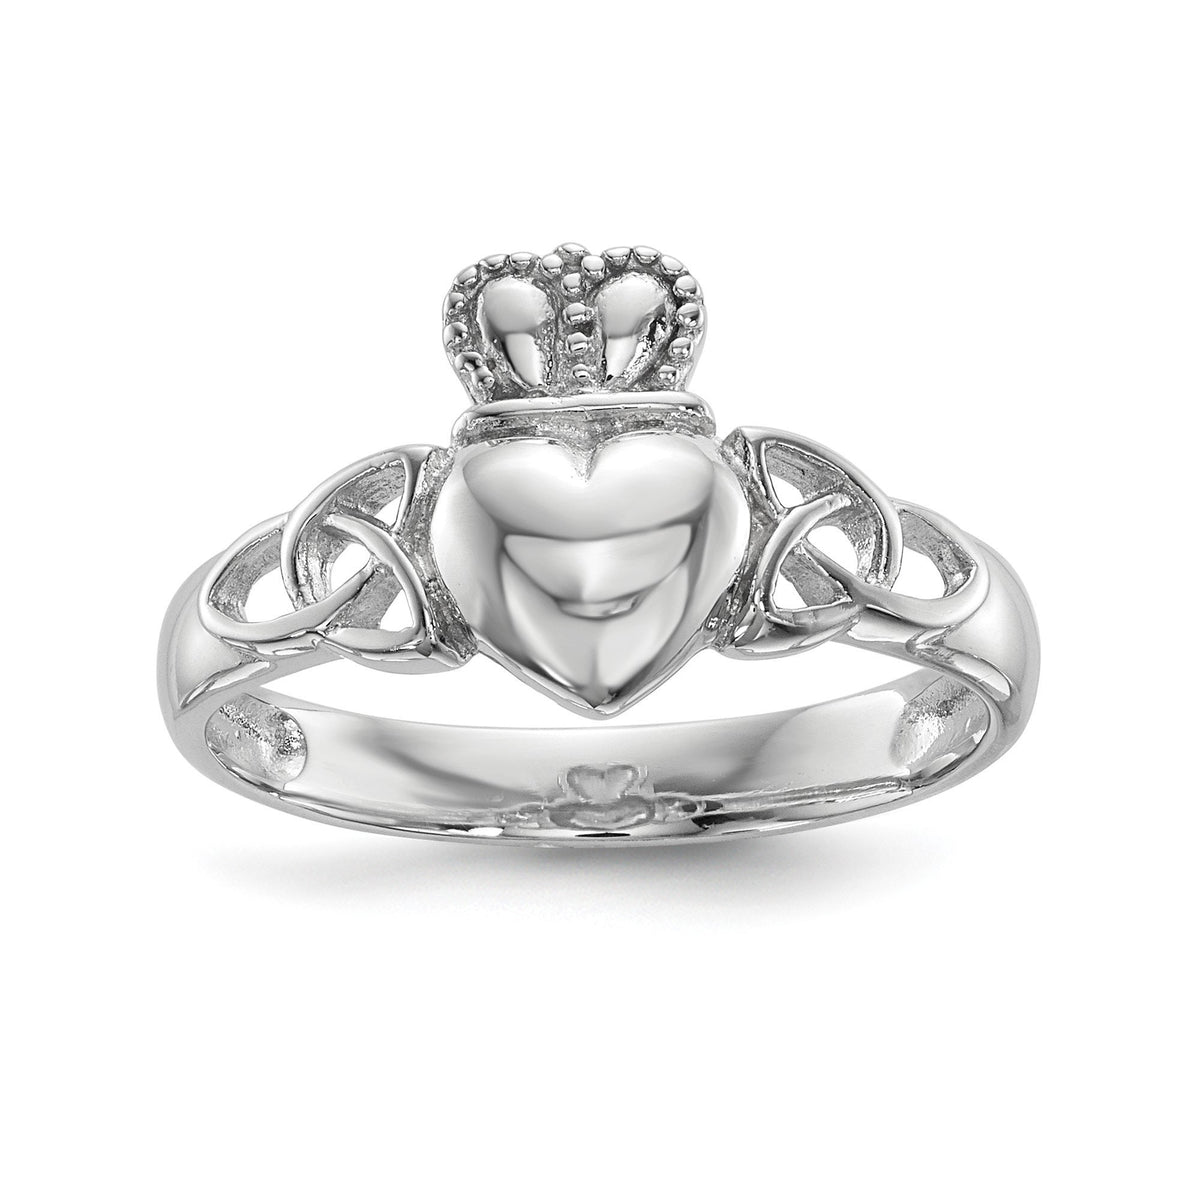 Womens Claddagh Ring Celtic Band available in Sterling Silver Claddagh Ring Sizes 6-8 -Gift Box Included